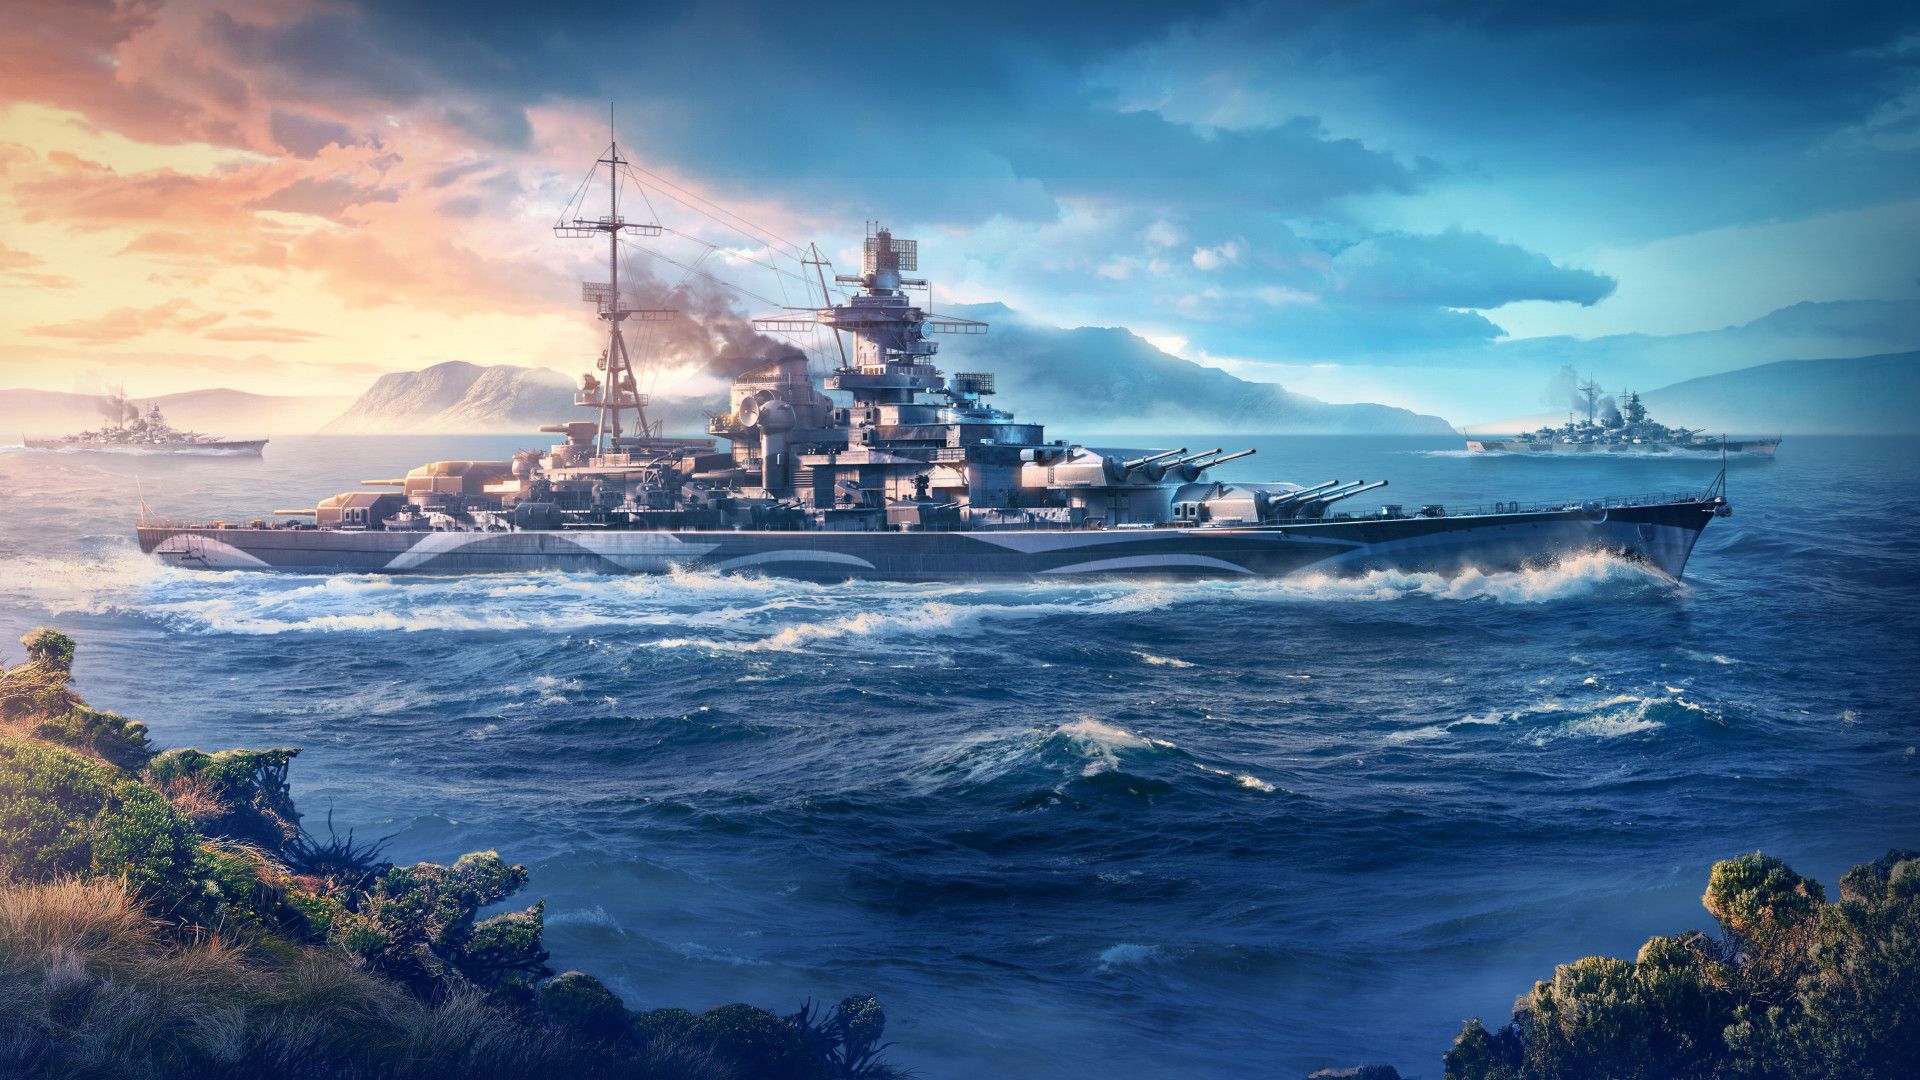 World of Warships Legends February Update Introduces Pride of Prussia